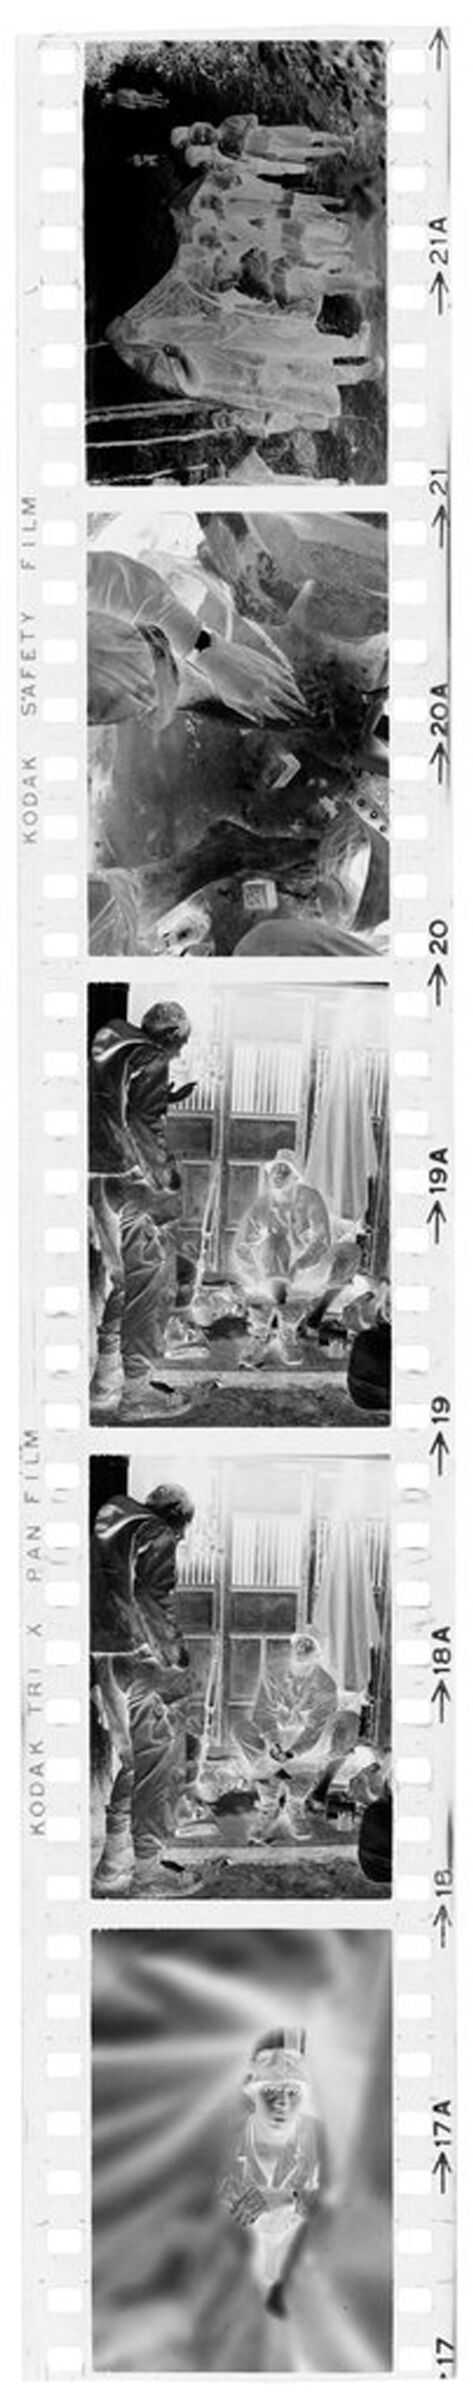 Untitled (Soldier Seated Outside Building Resting Feet; Soldier With Vietnamese Children, Vietnam)